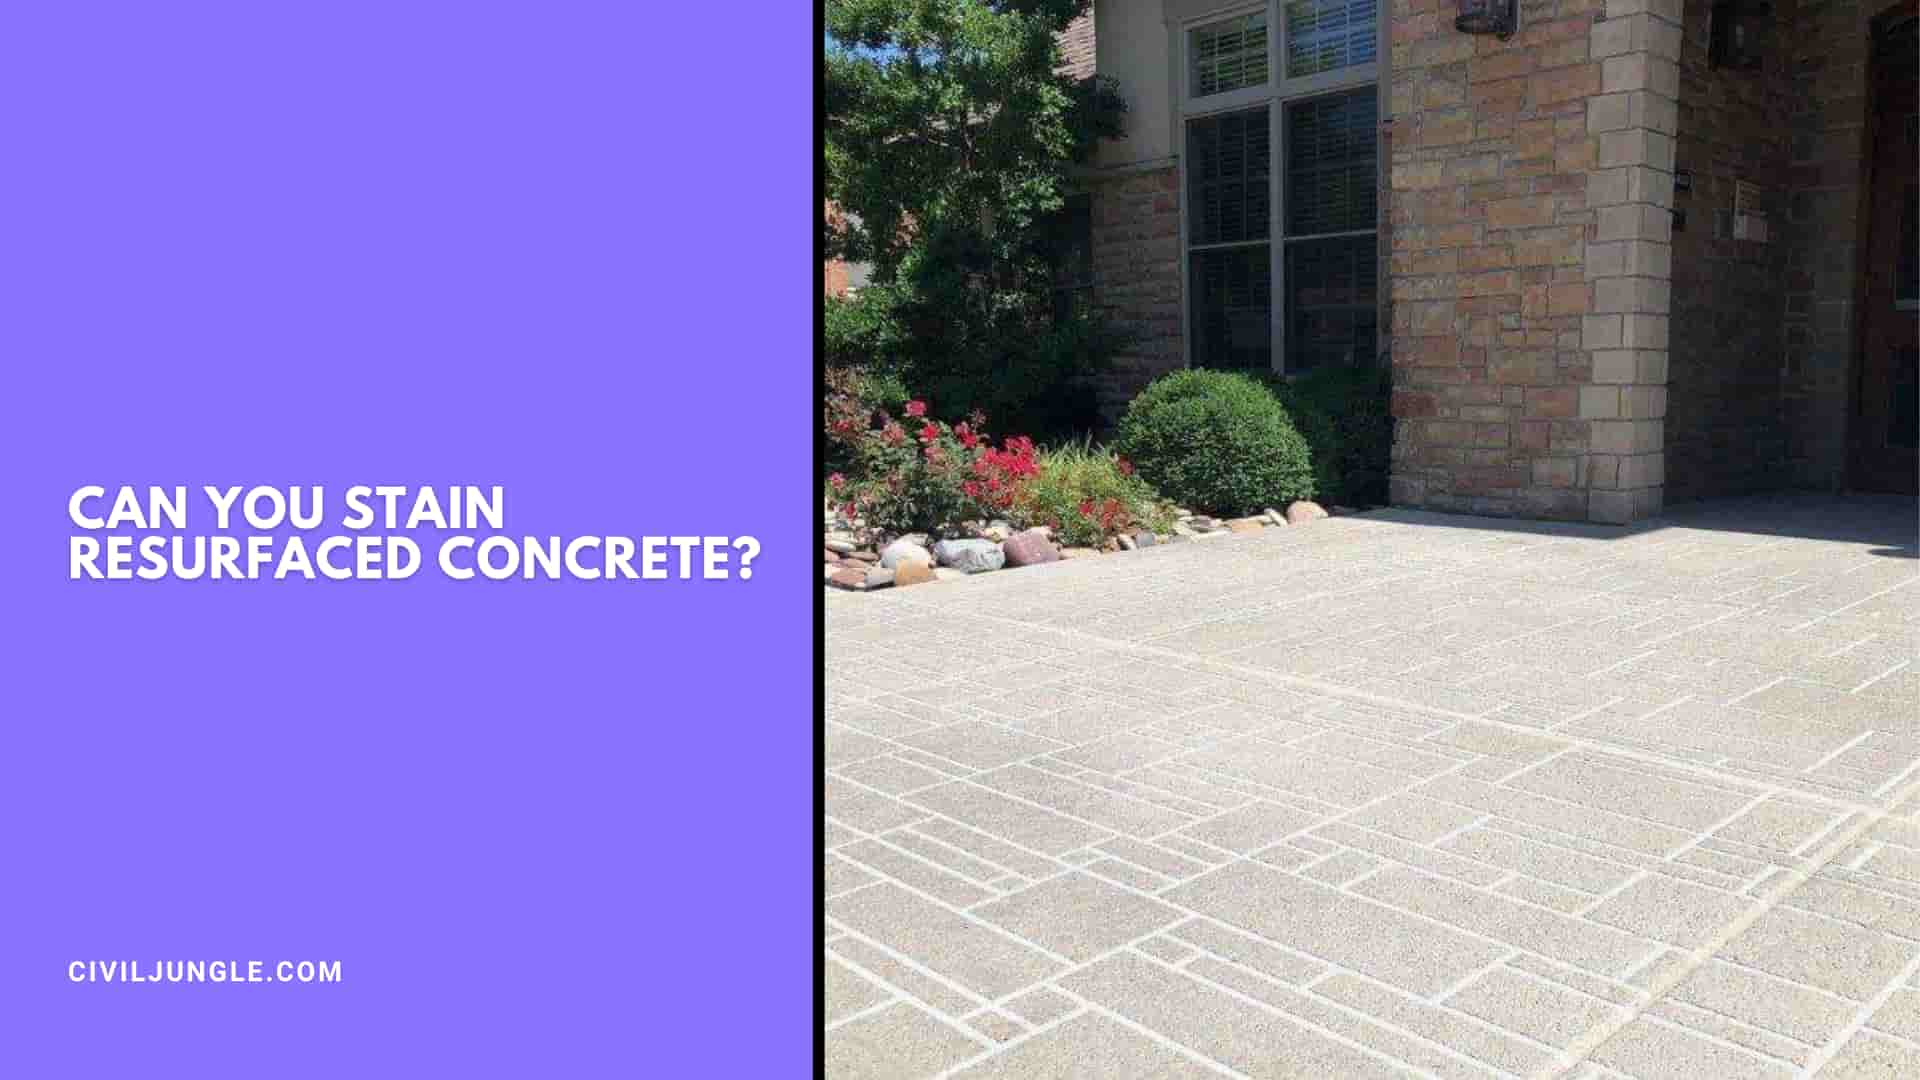 Can You Stain Resurfaced Concrete?